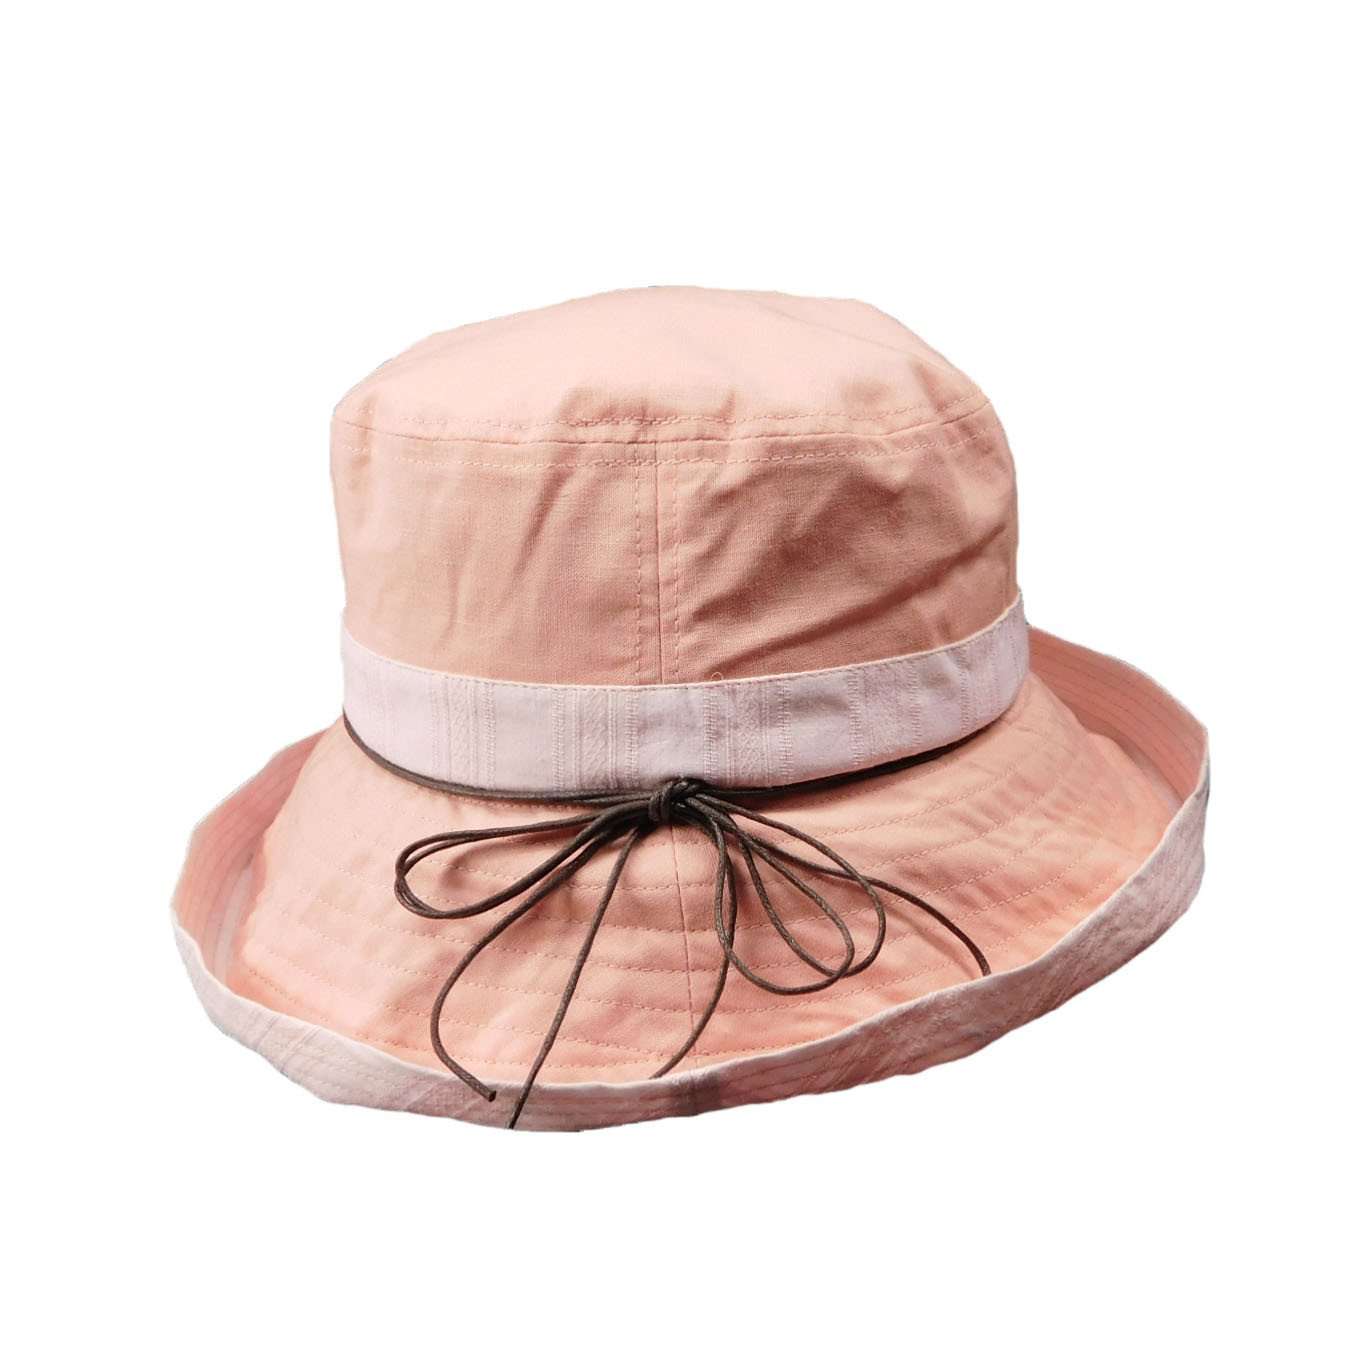 Large Size Women's Bucket Hat for Big Heads Kettle Brim Hat Peter Grimm WSCL527PK Pink  